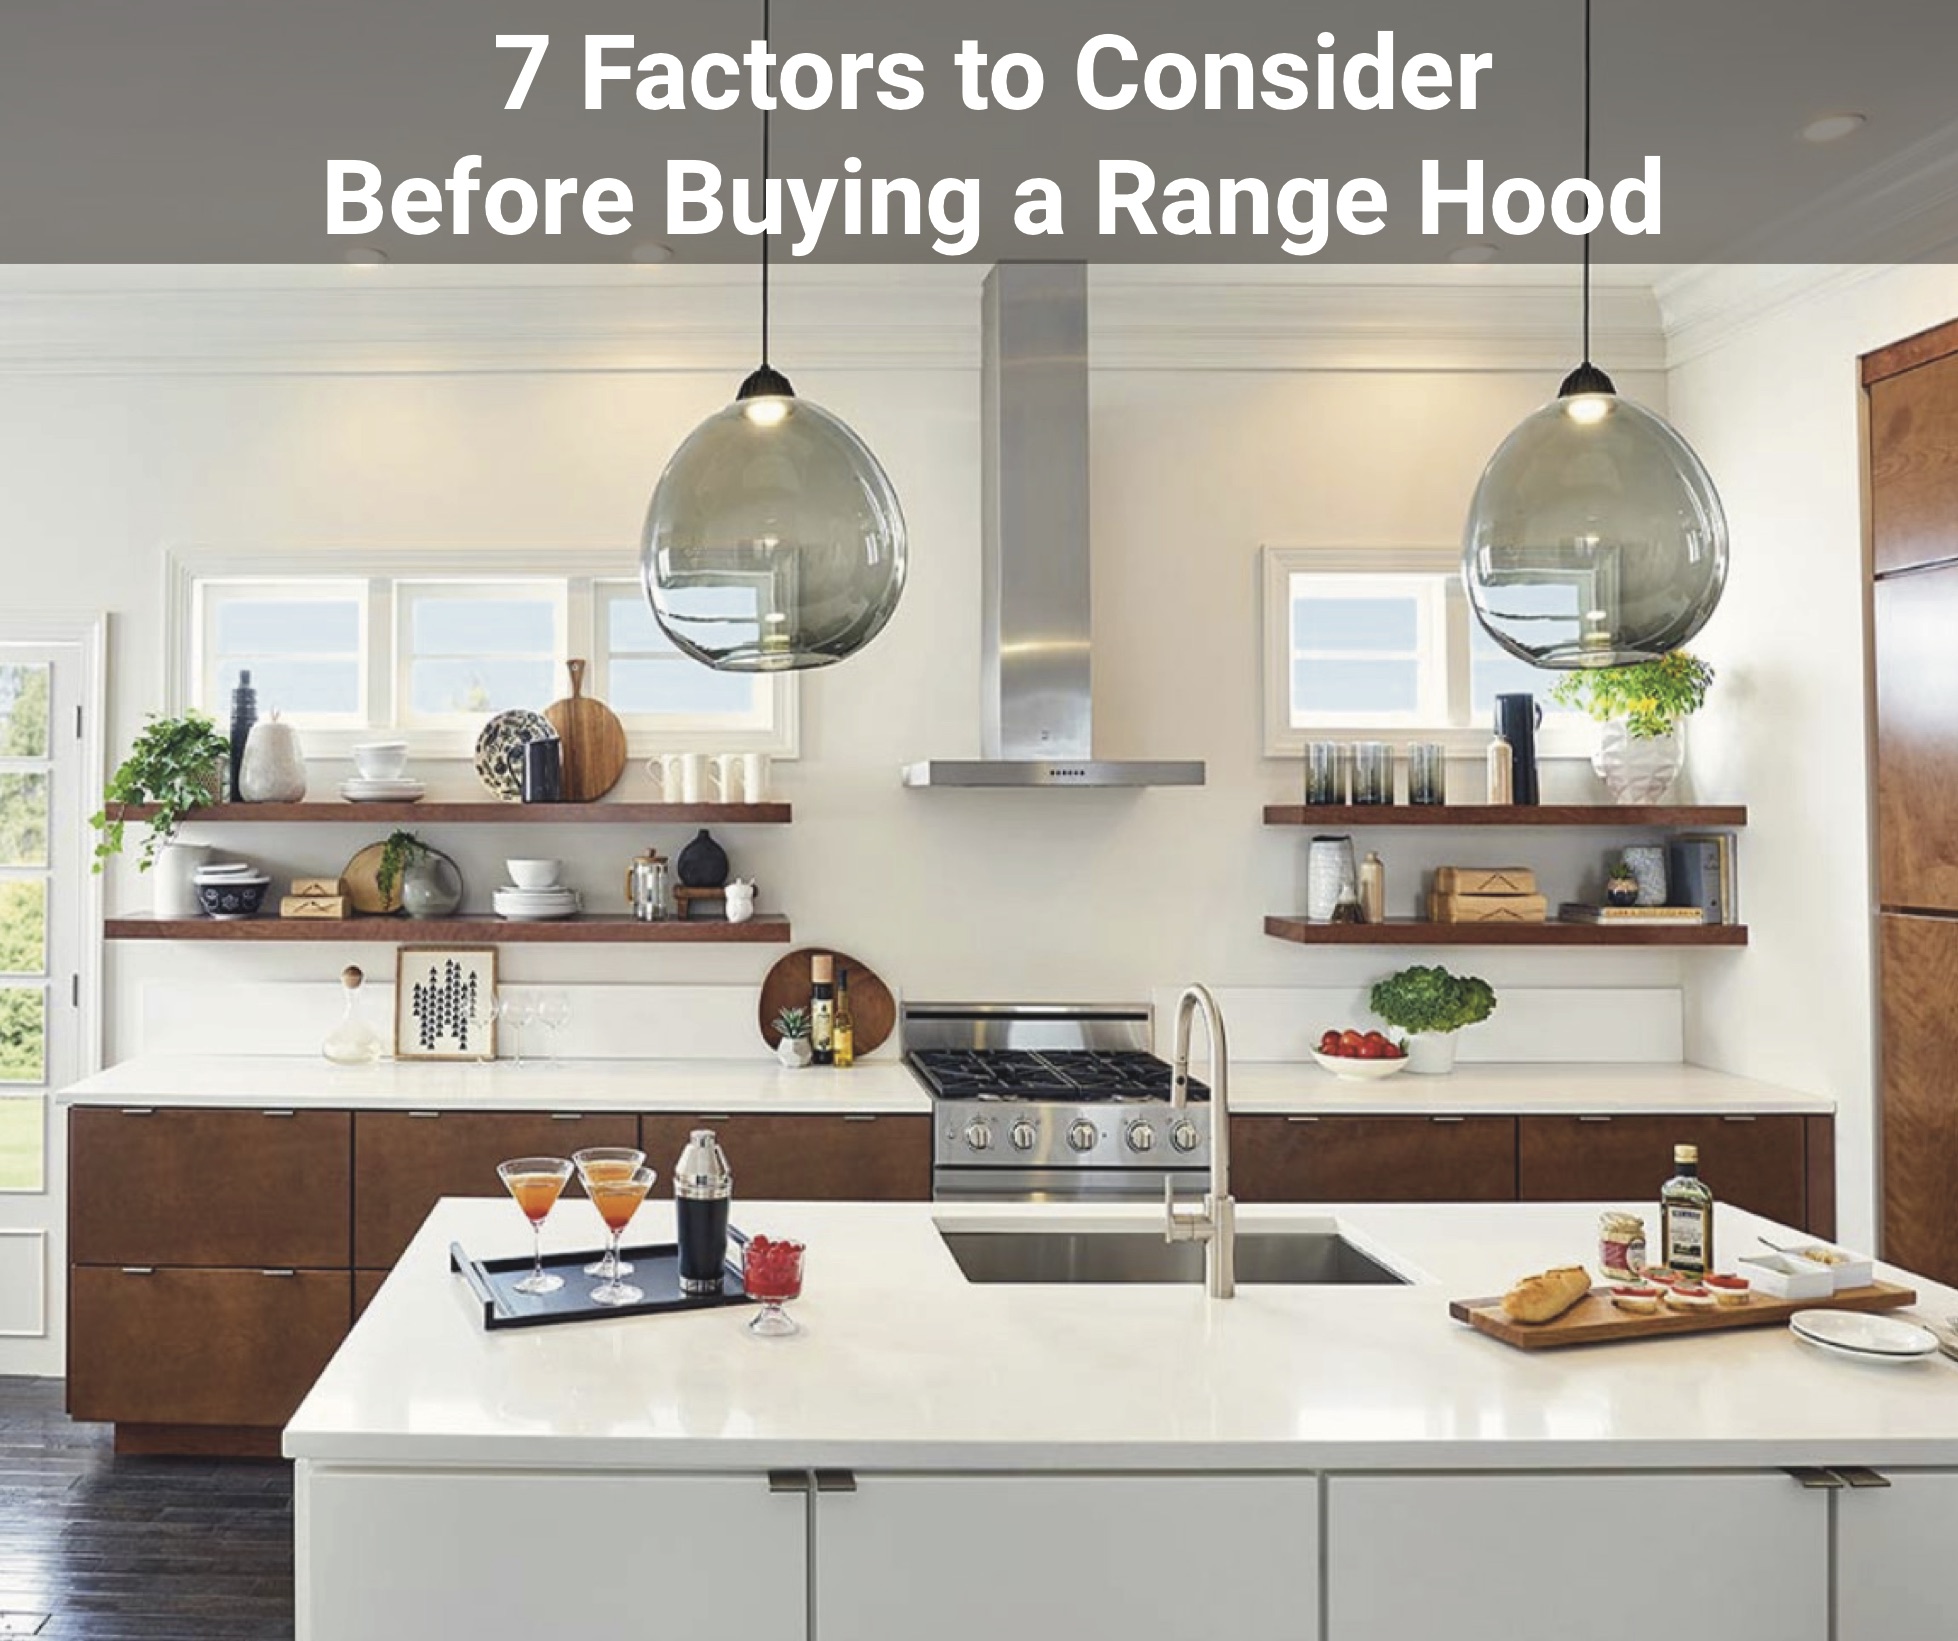 7 Factors to Consider Before Buying a Range Hood